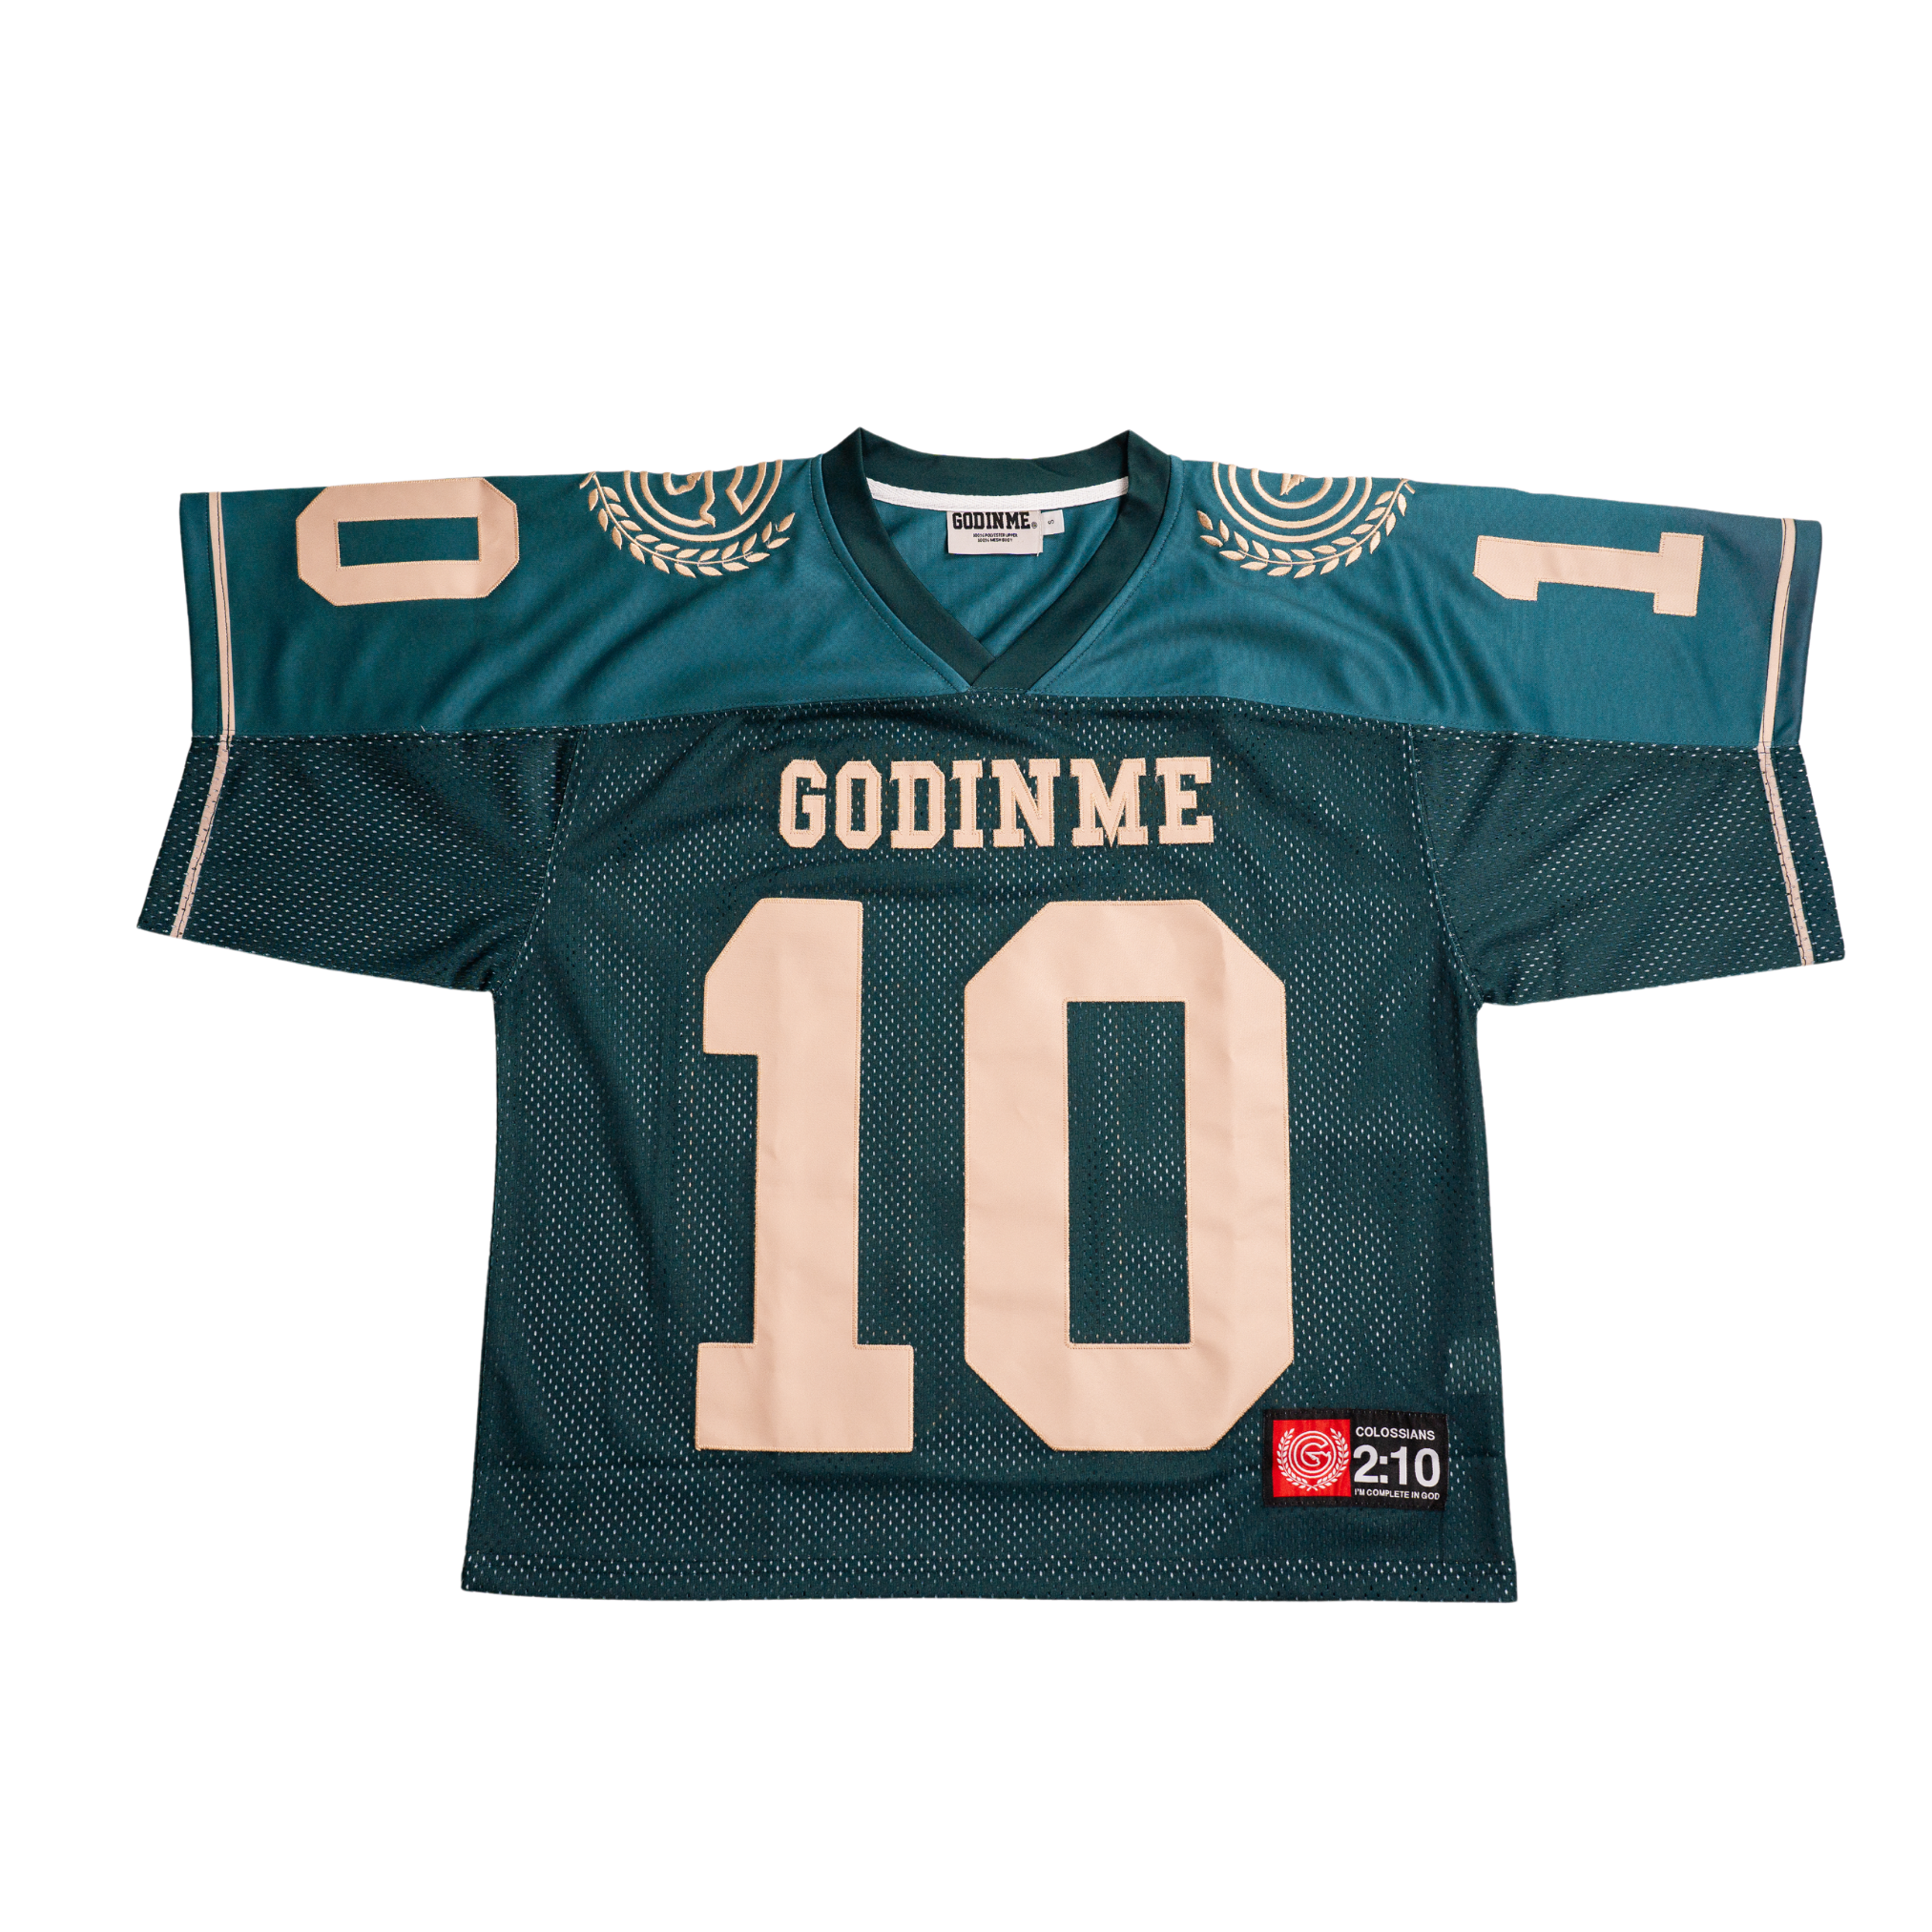 "COMPLETE IN GOD" BOXY JERSEY